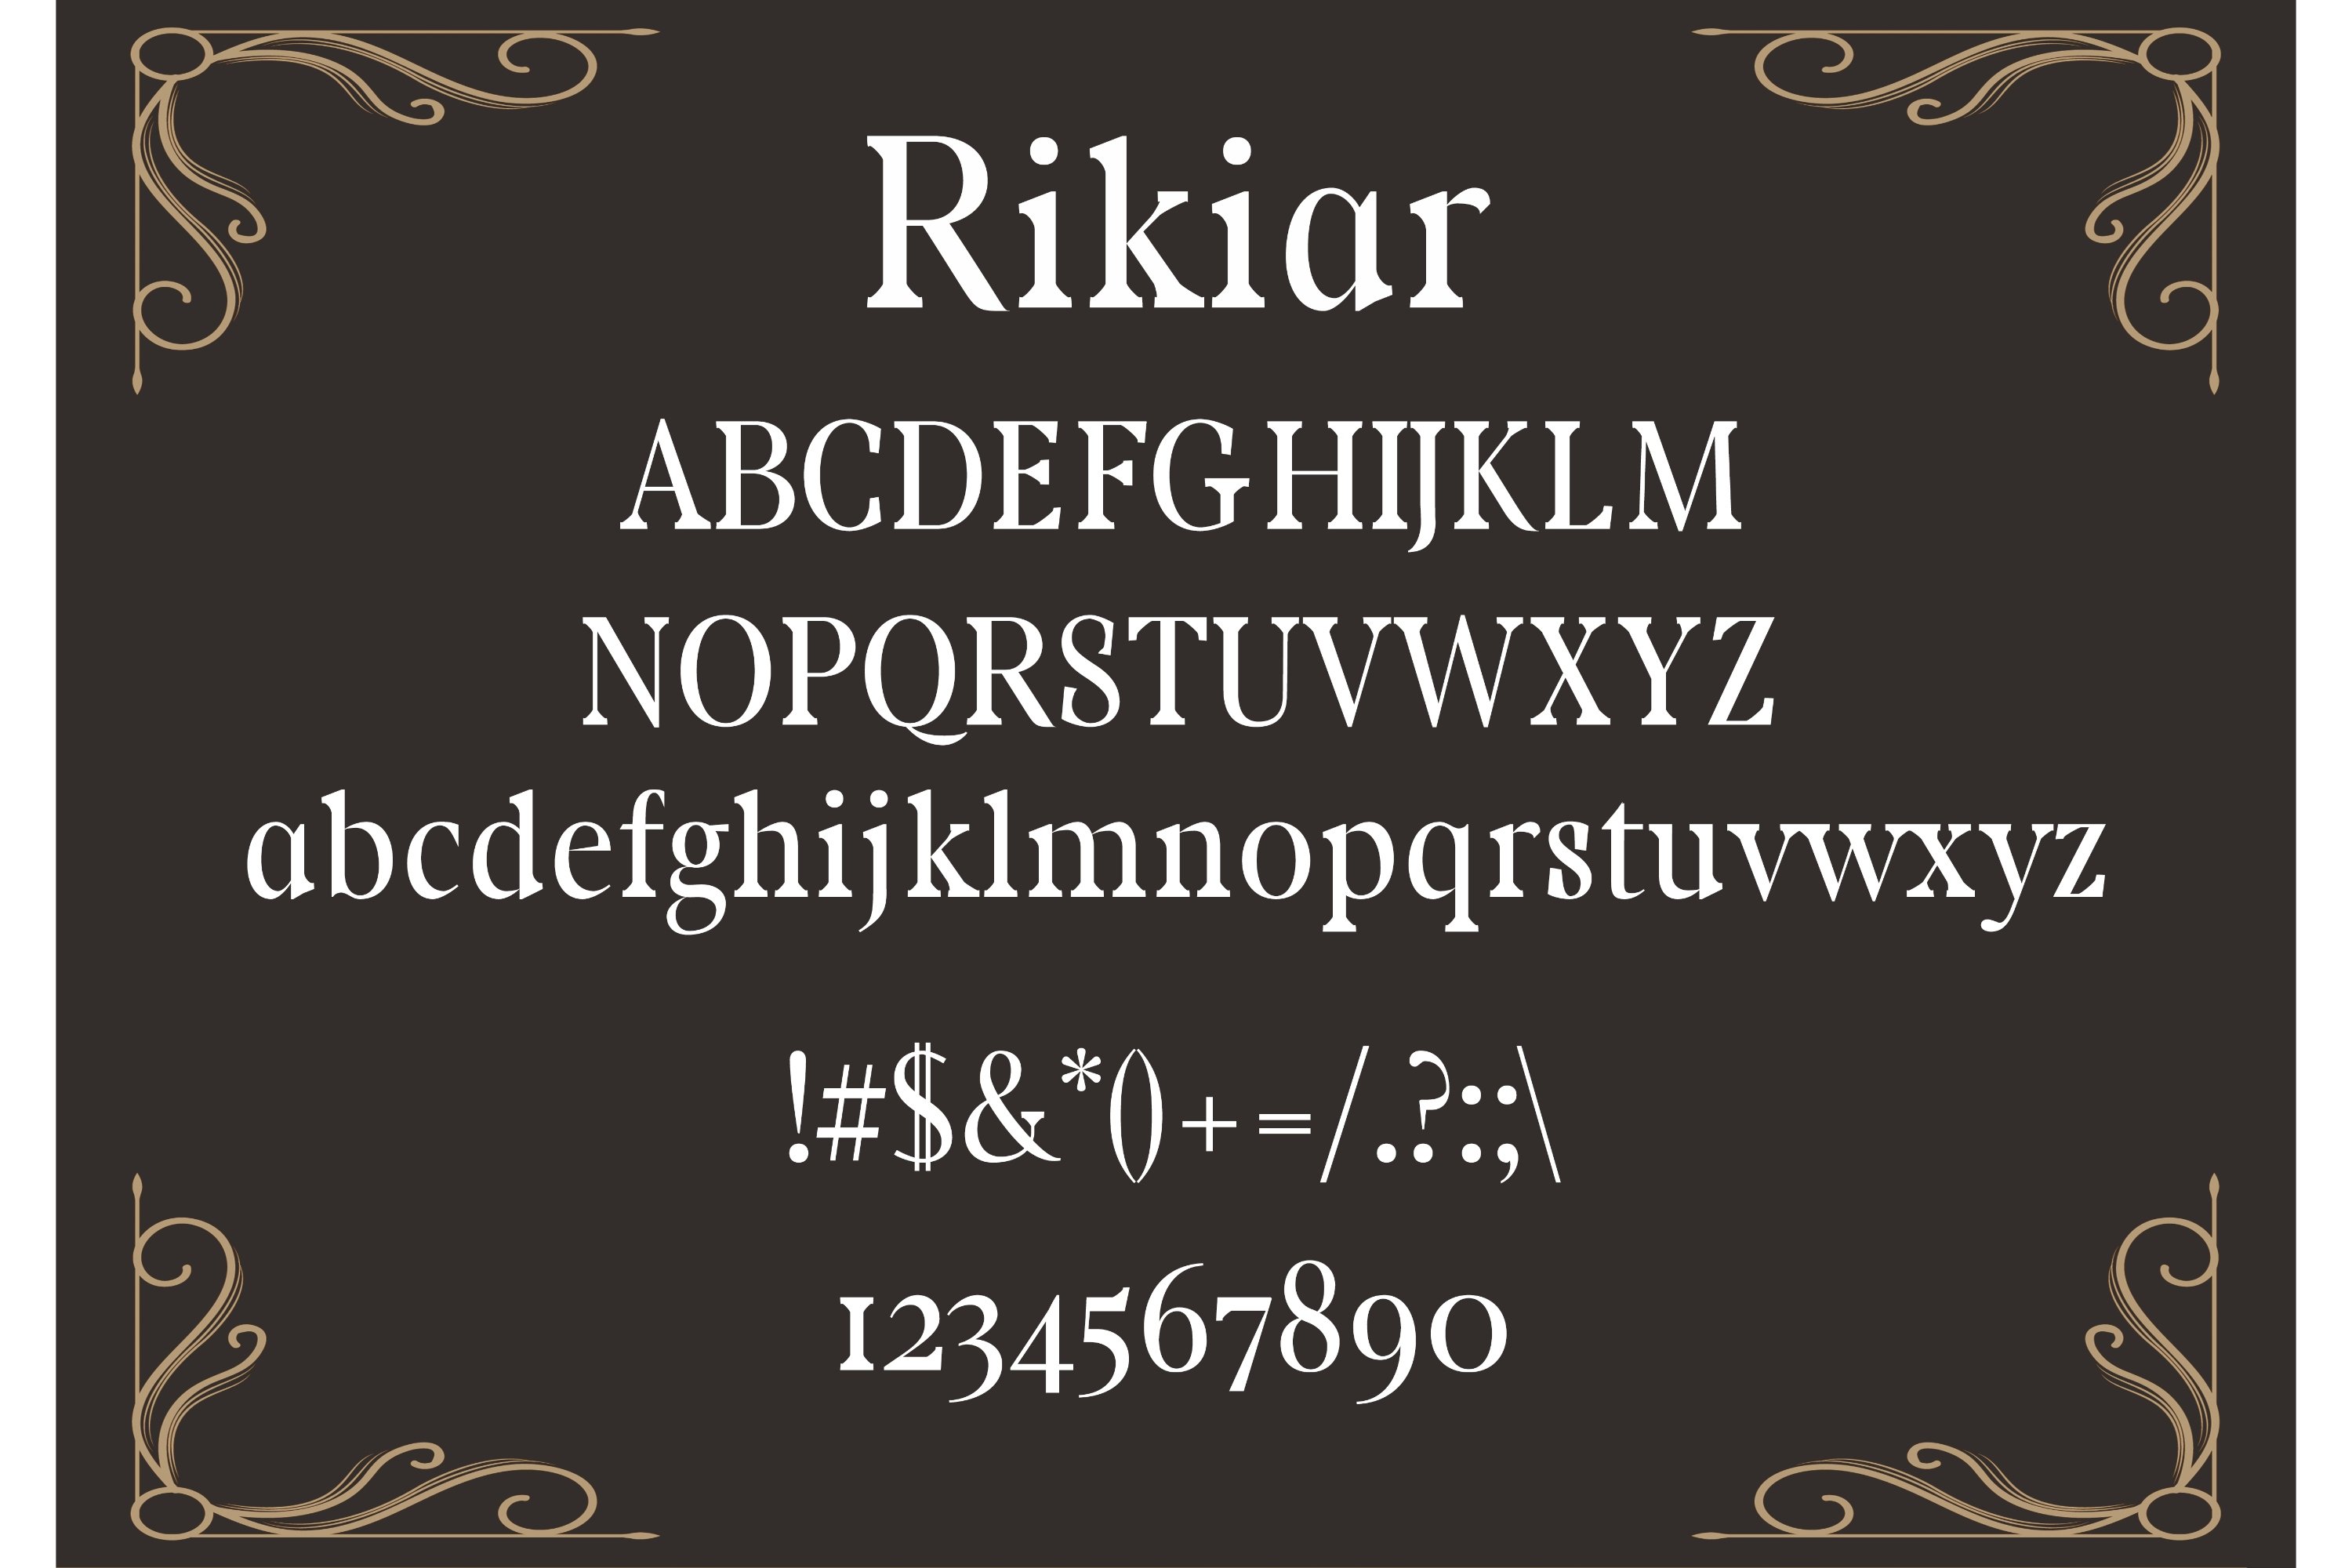 Rikiar Gothic Font preview image.